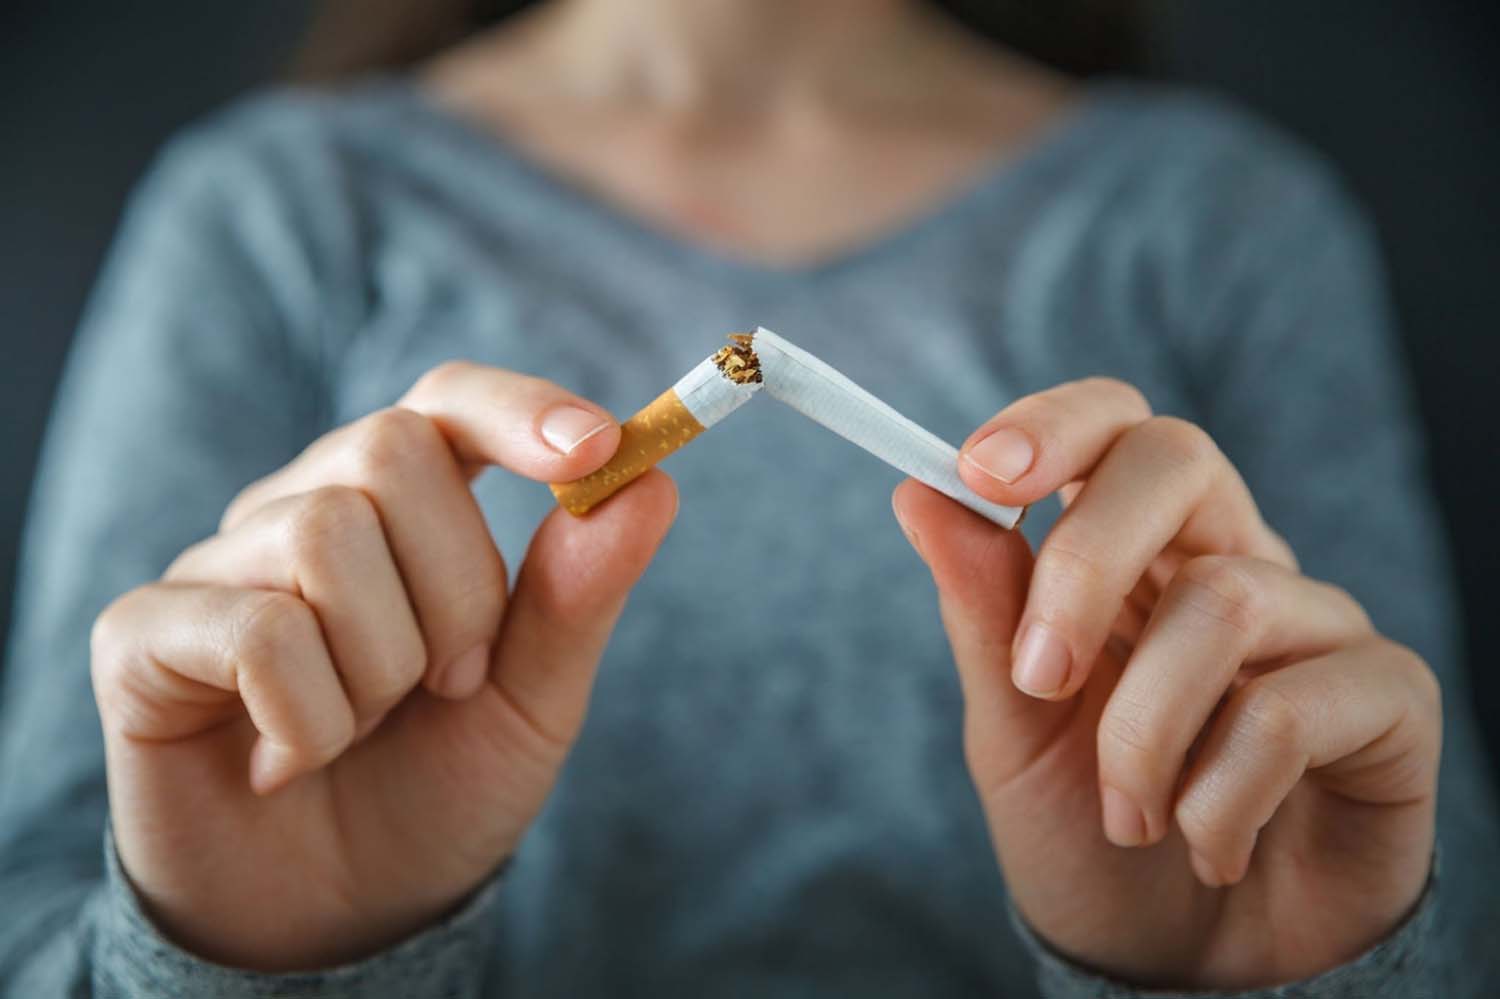 Smoking and Anxiety: Link Between Cigarettes and Mental Health